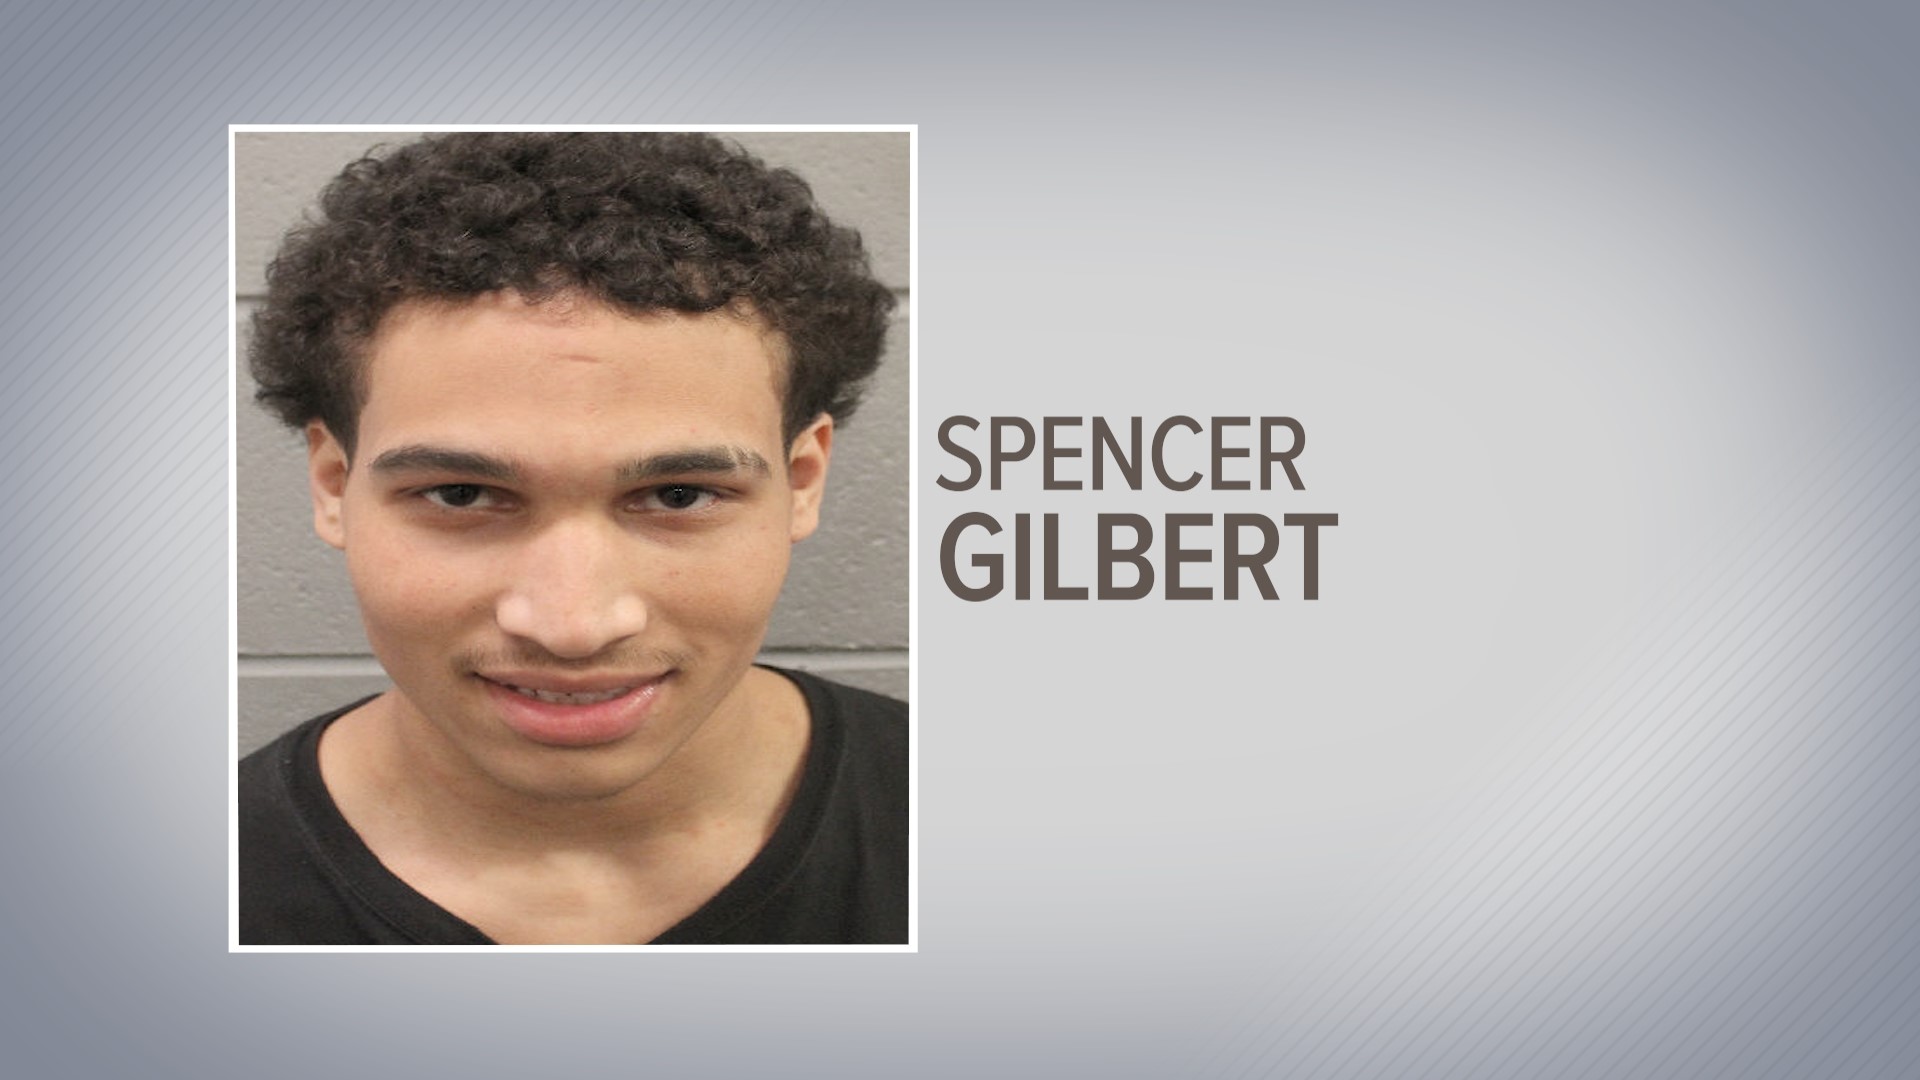 Prosecutors said Spencer Orlando Gilbert drove from North Texas to Houston and forced a young man along for the ride at gunpoint.